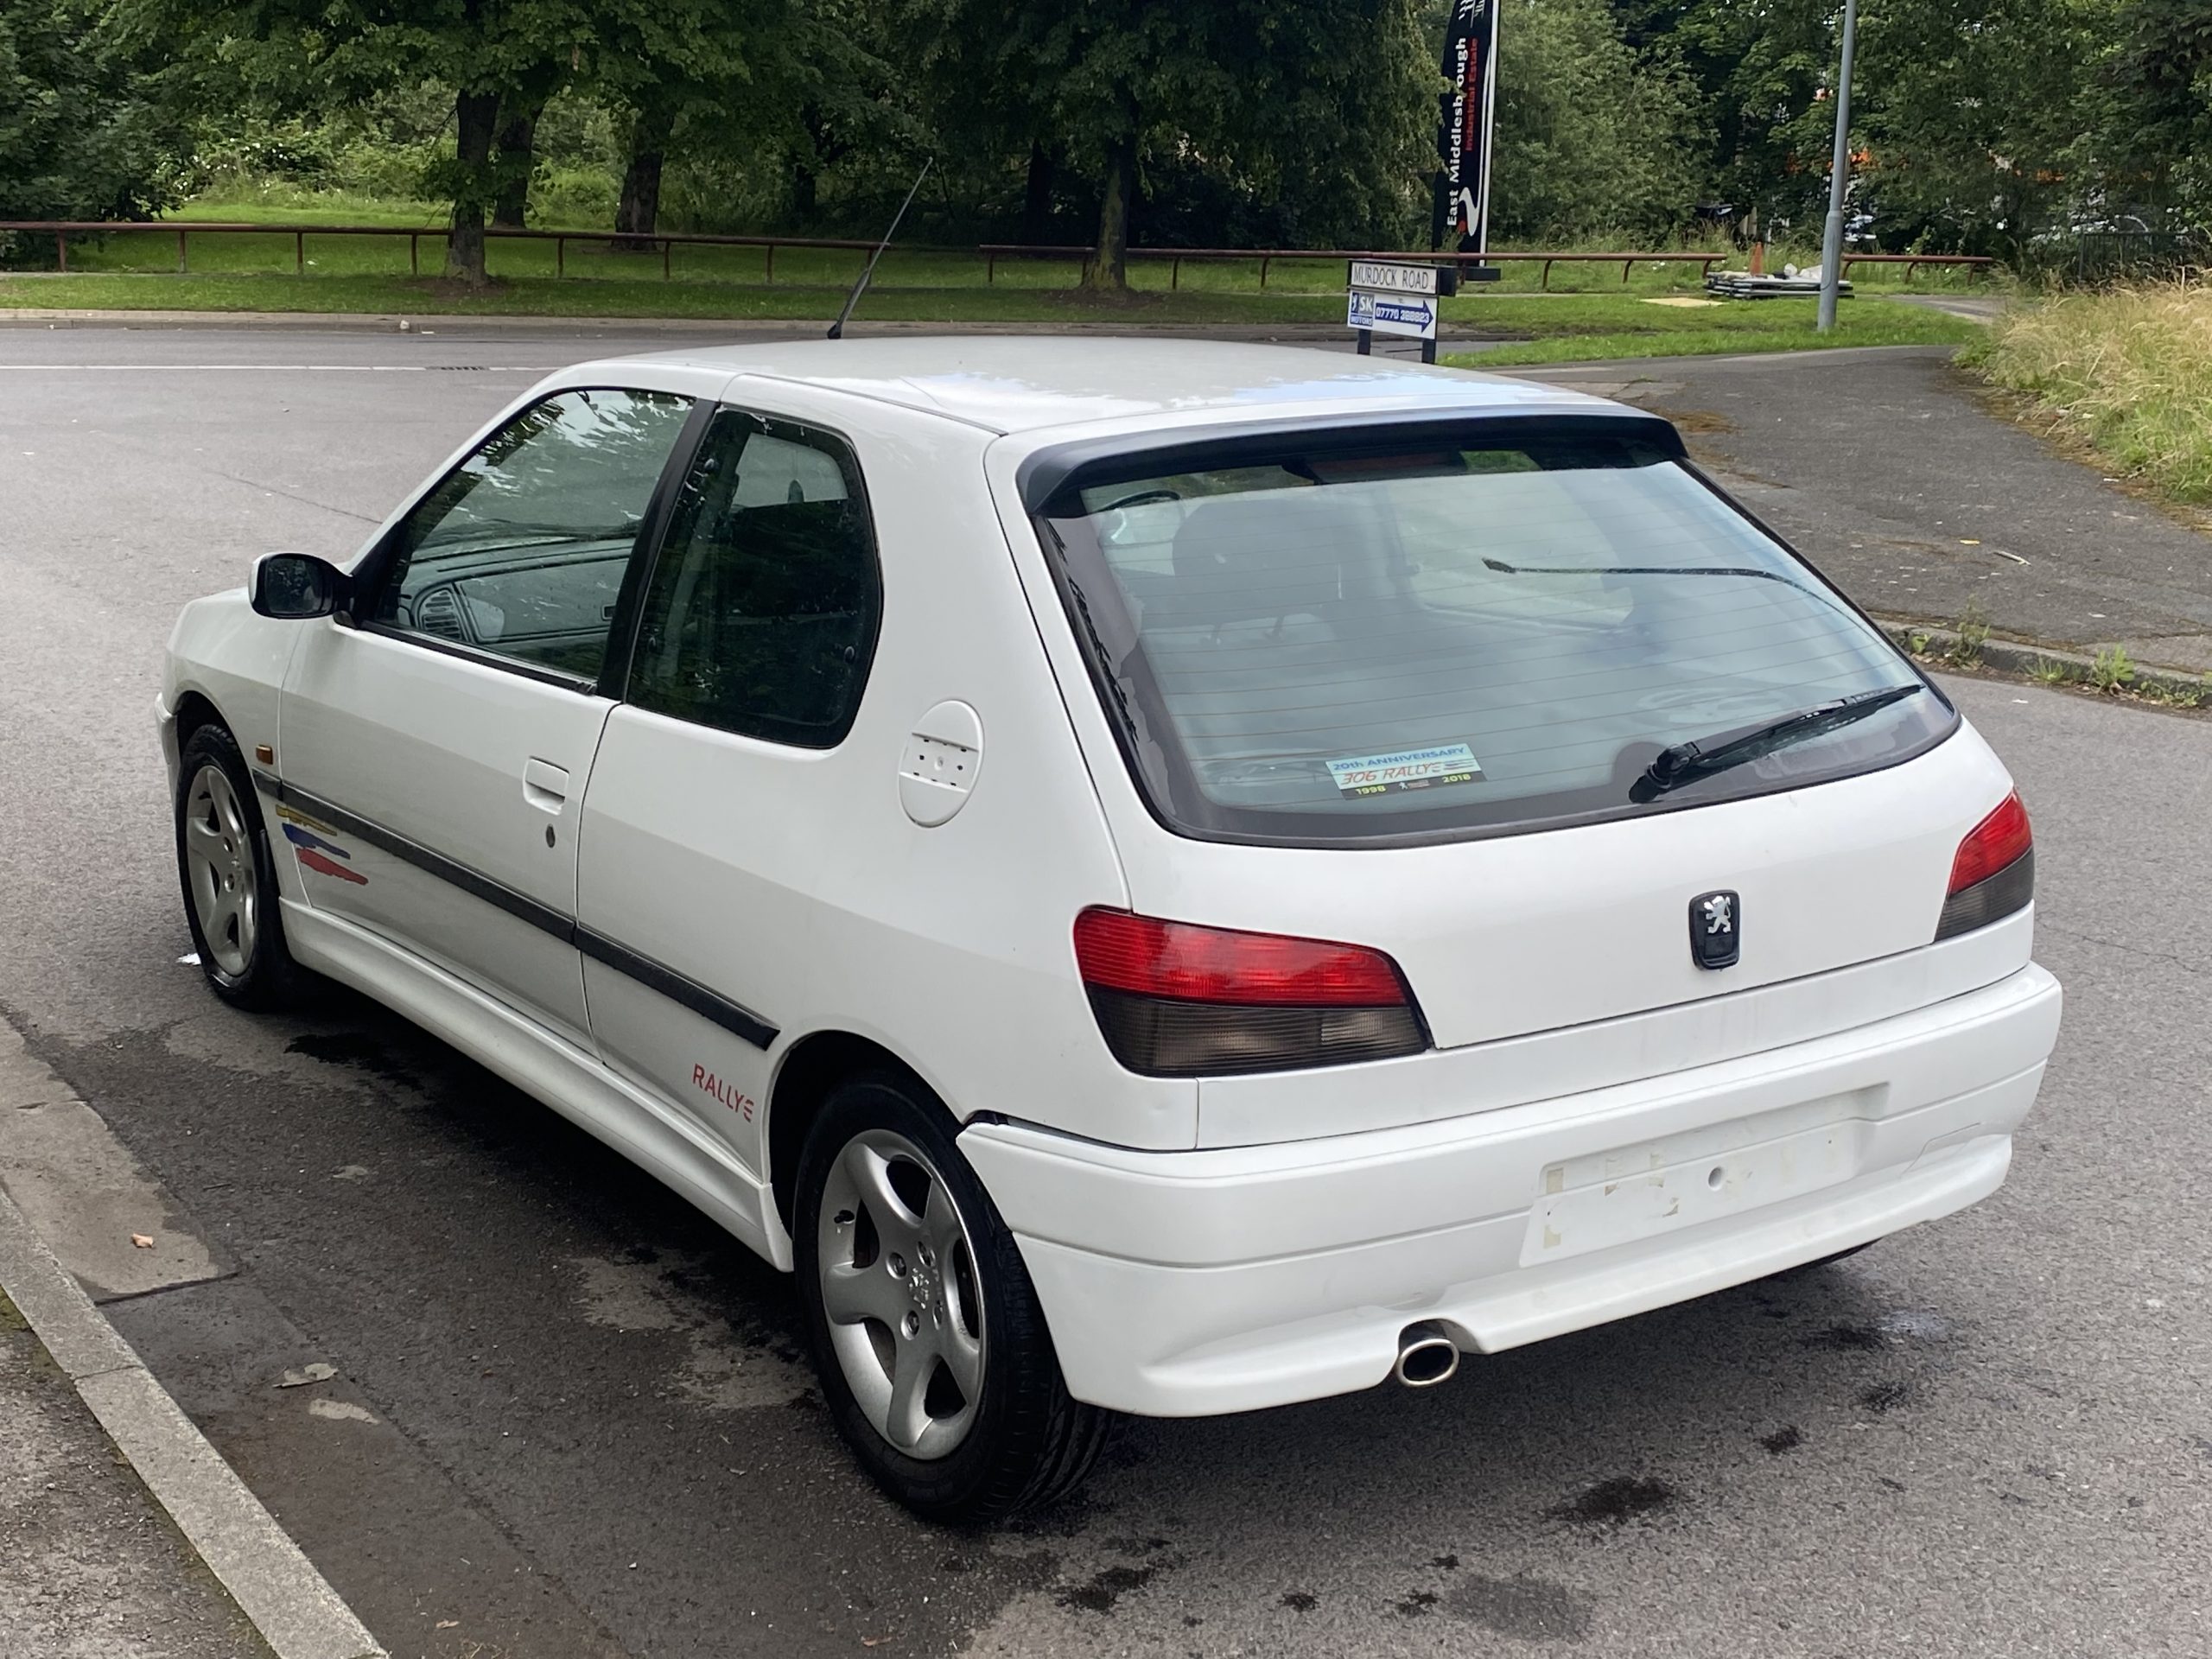 Peugeot 306 Rallye Review - The Greatest Peugeot Of All Time